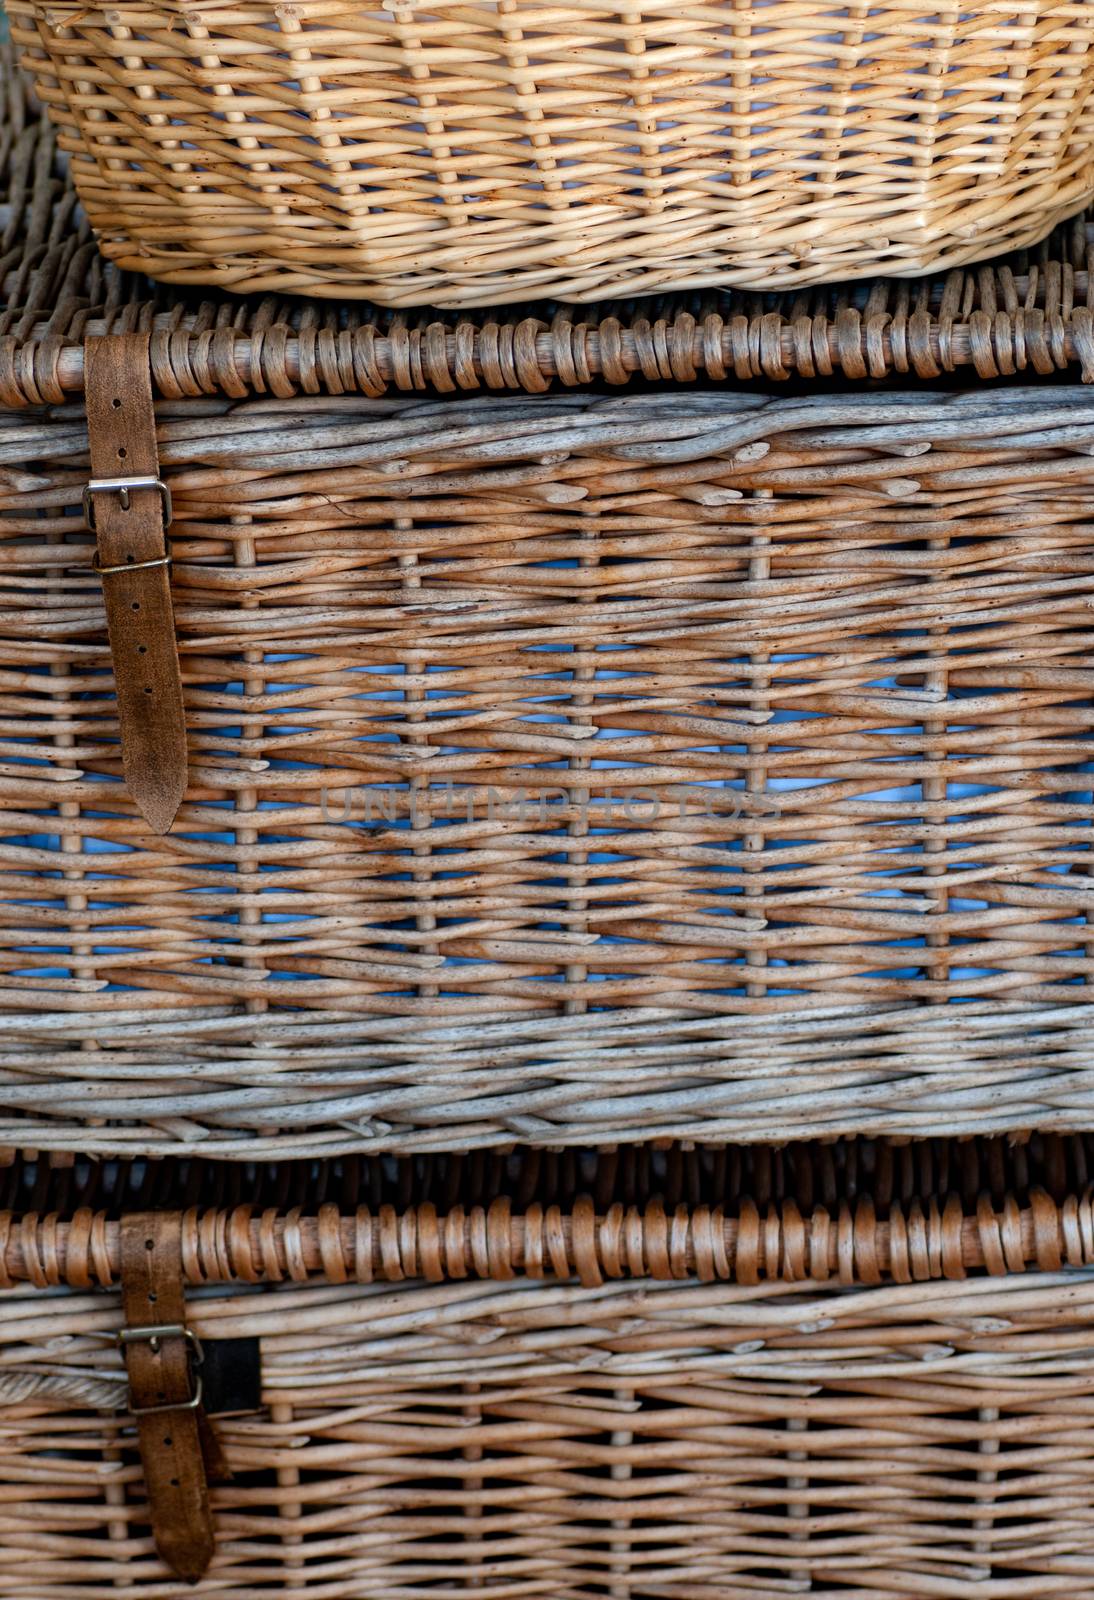 A stack of wicker washing baskets